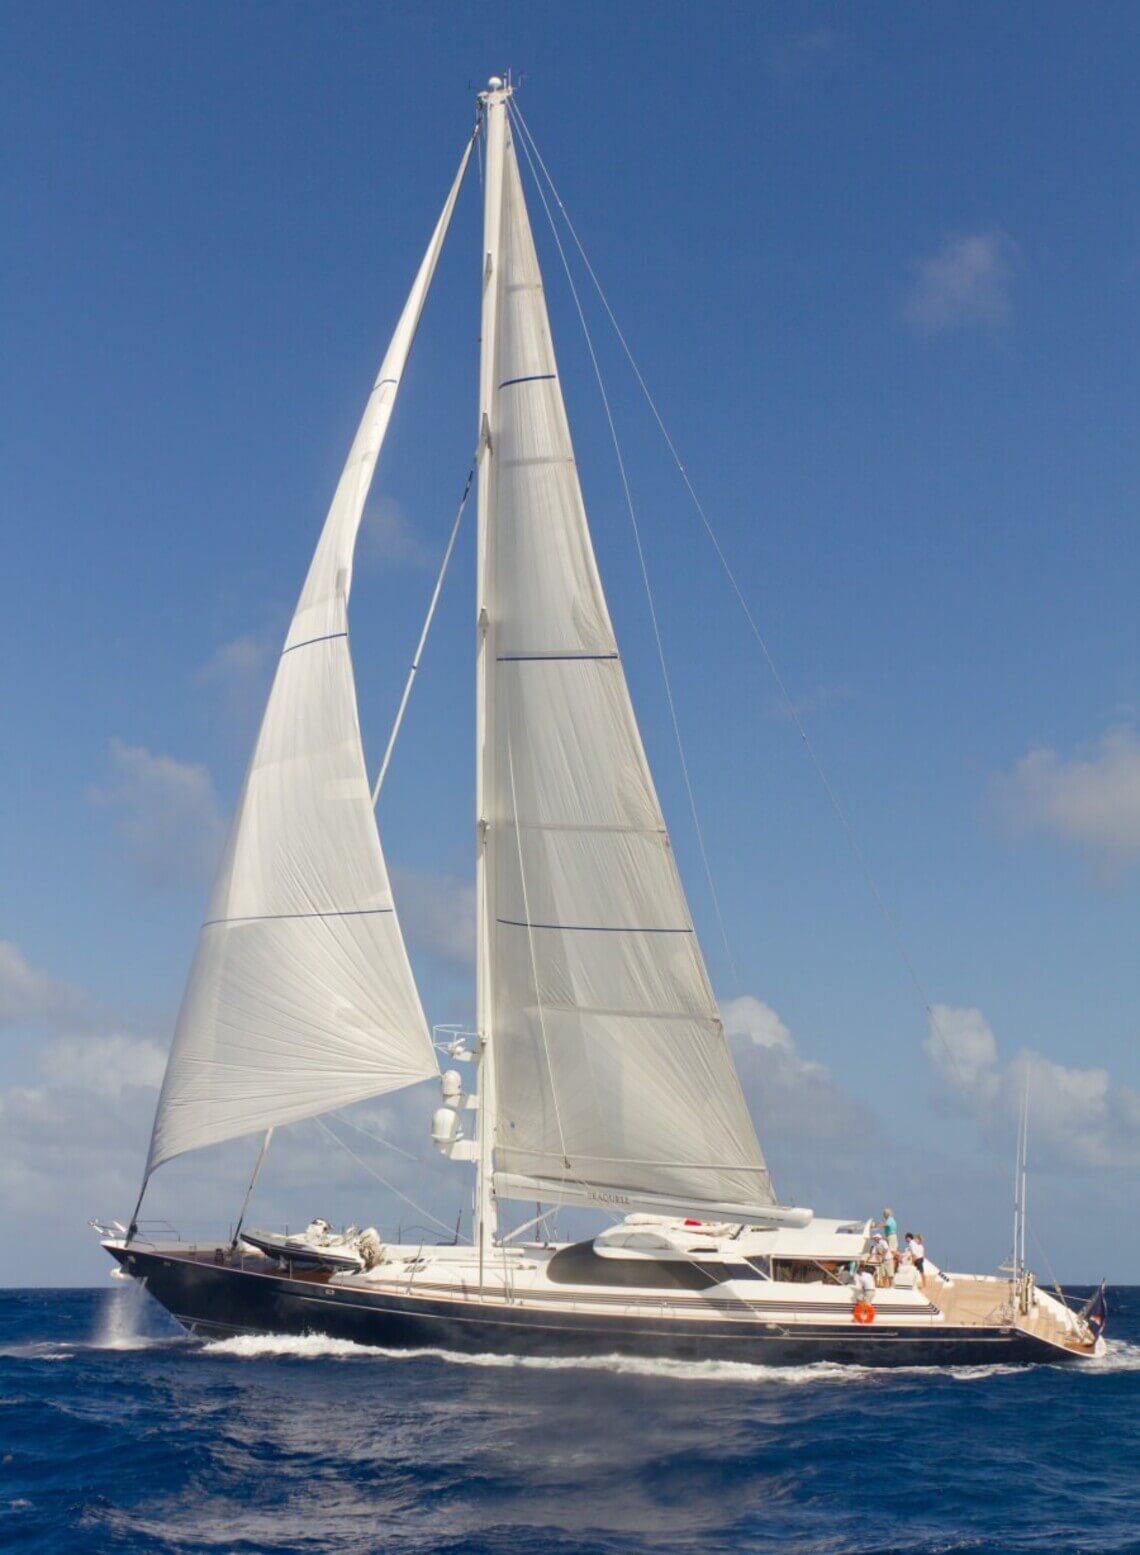 seaquell yachting limited